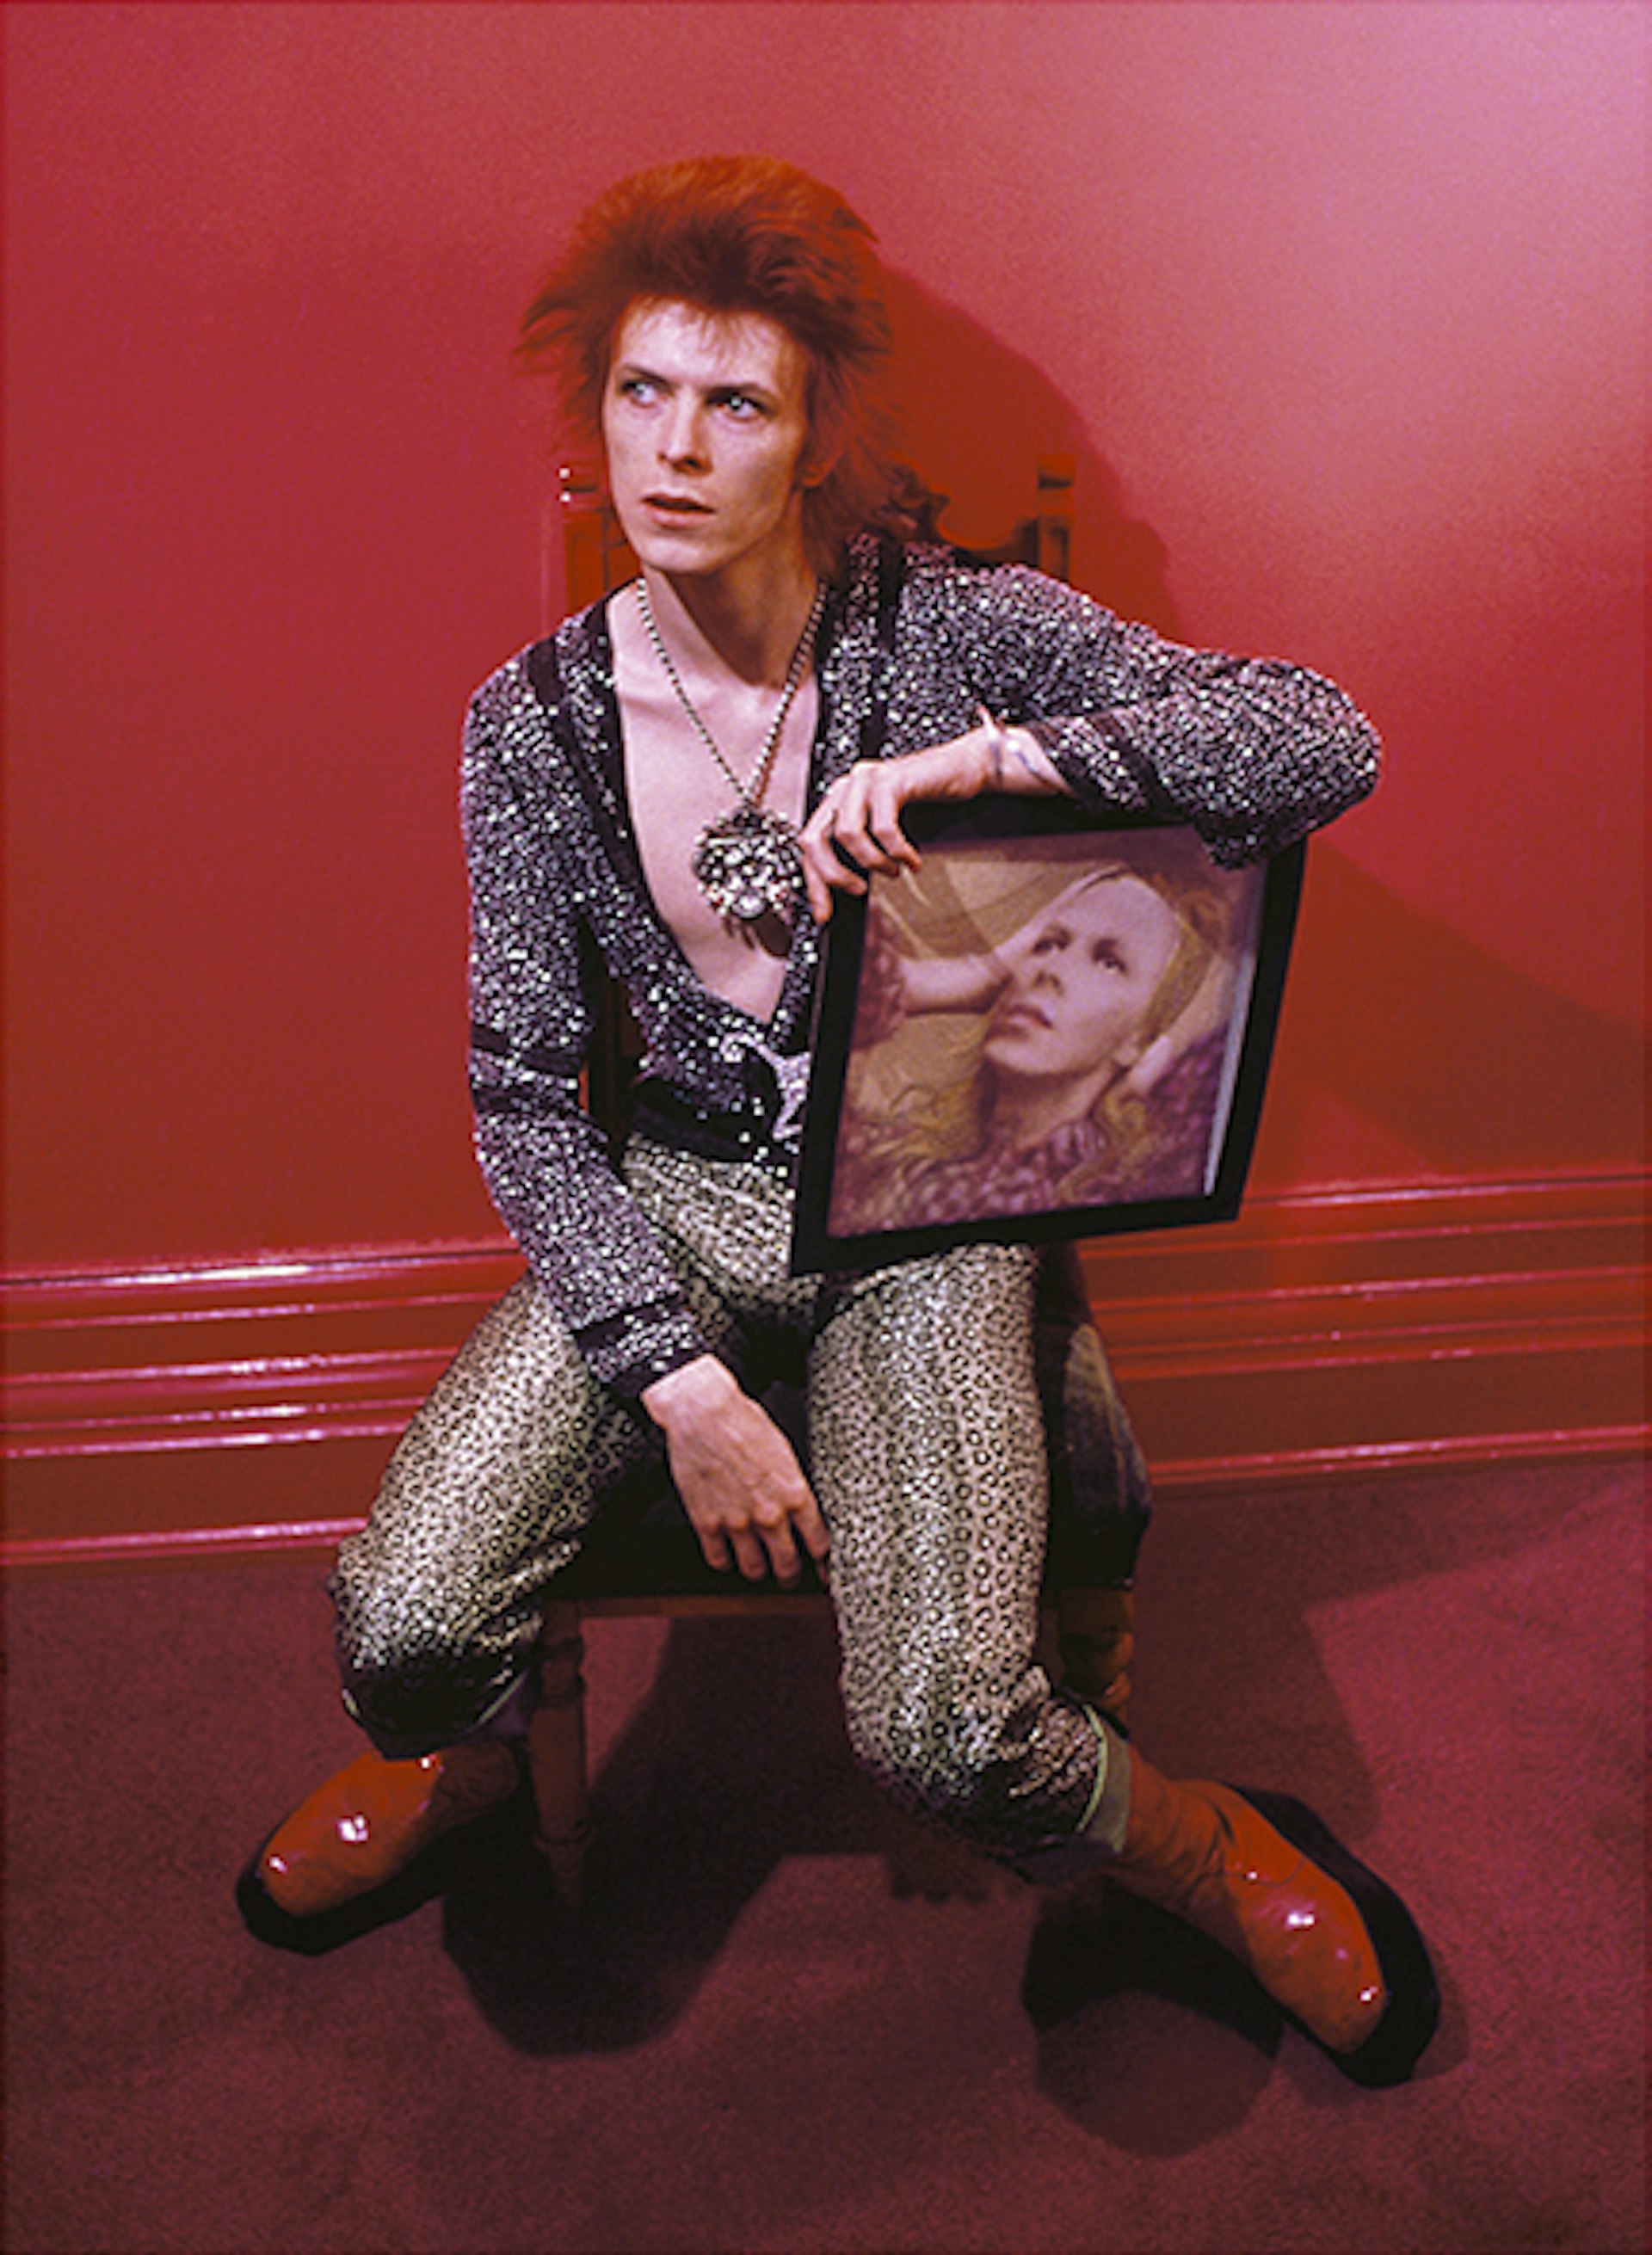 David Bowie with Hunky Dory album cover, Haddon Hall, UK, 1973, © Mick Rock / courtesy The Print Room 